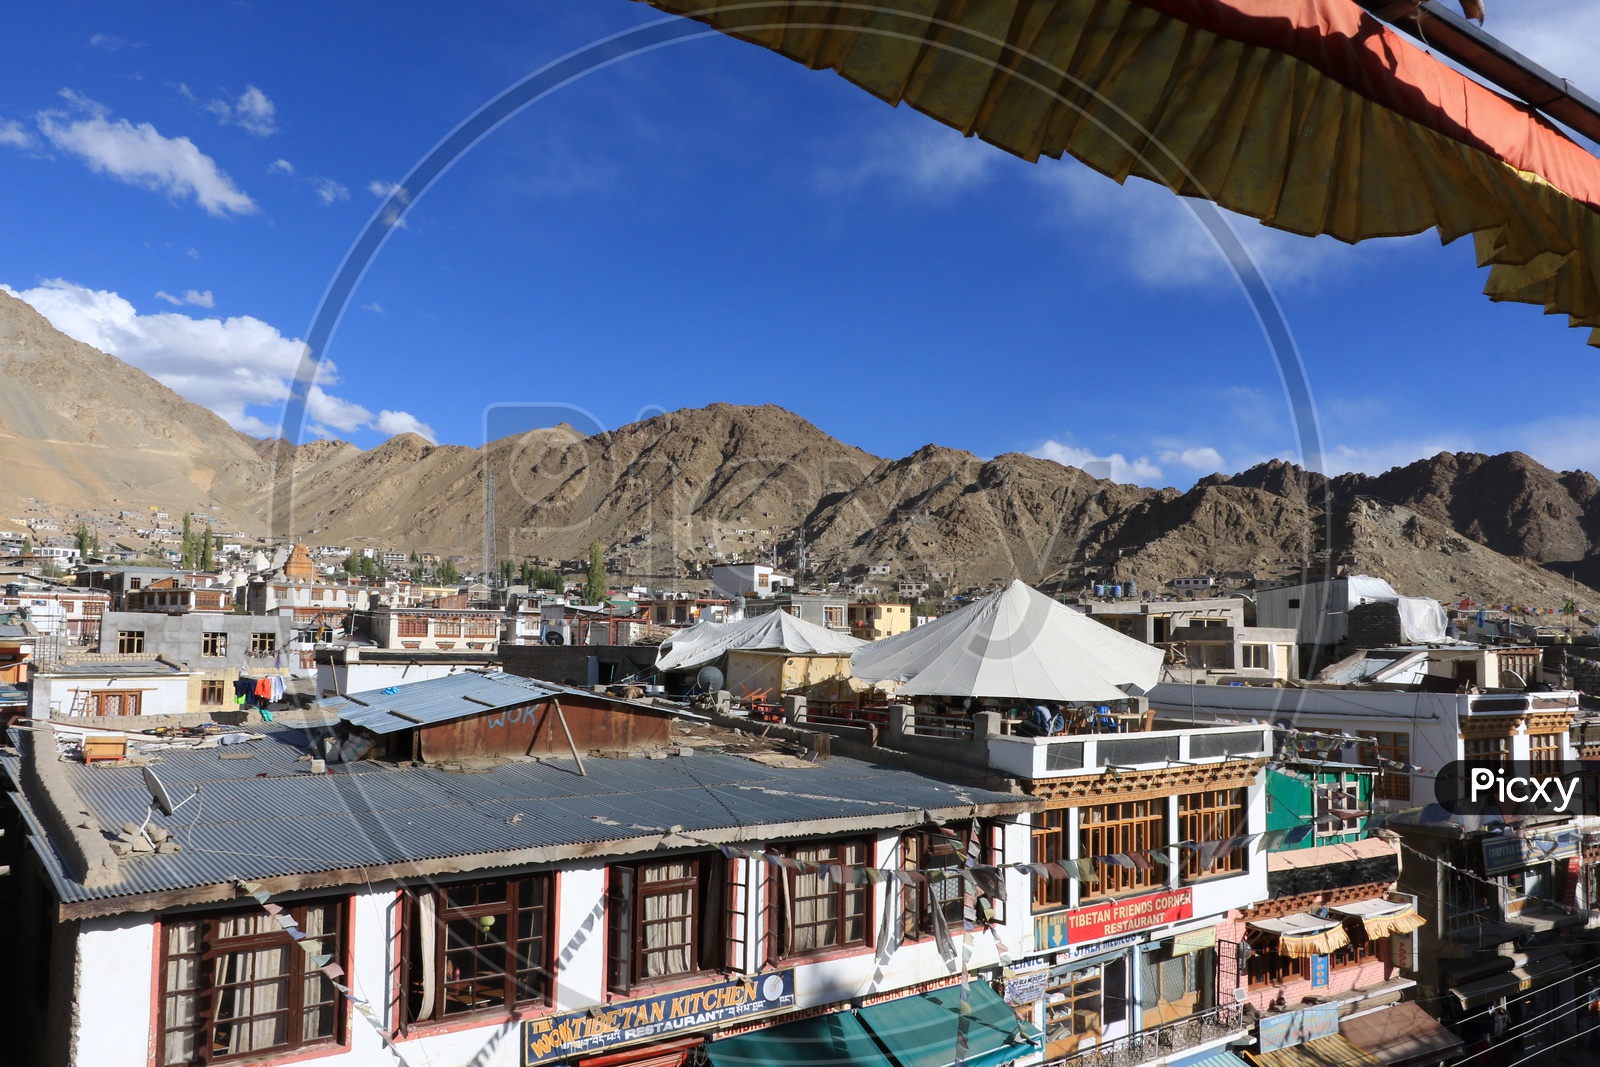 Beautiful Landscape mountains of leh with leh village in the foreground